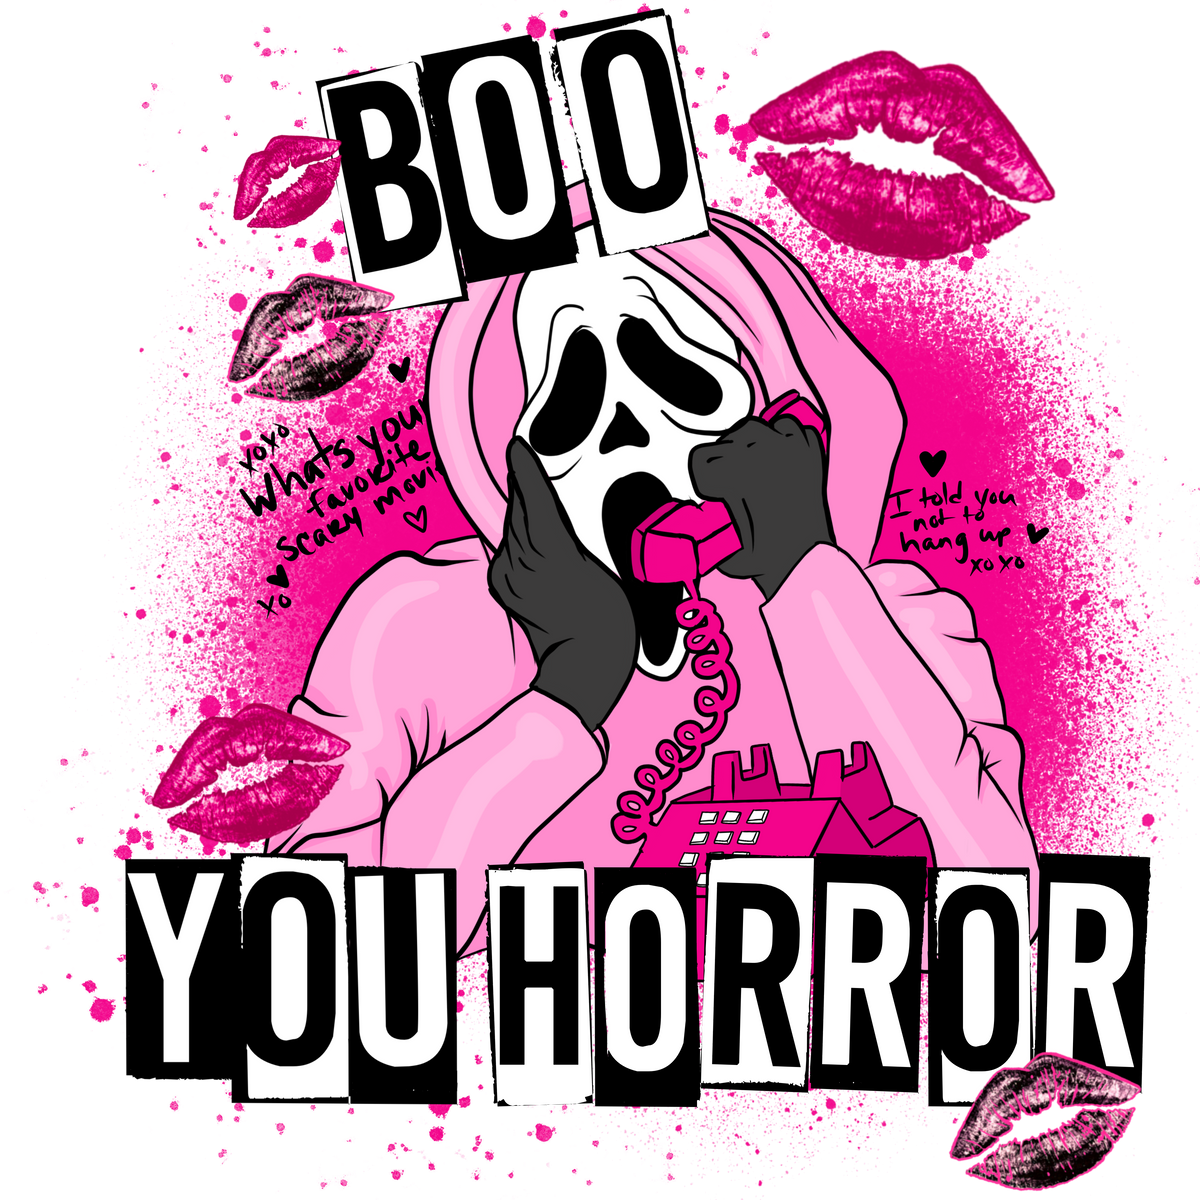 DTF Screen Print Image - Boo You Horror